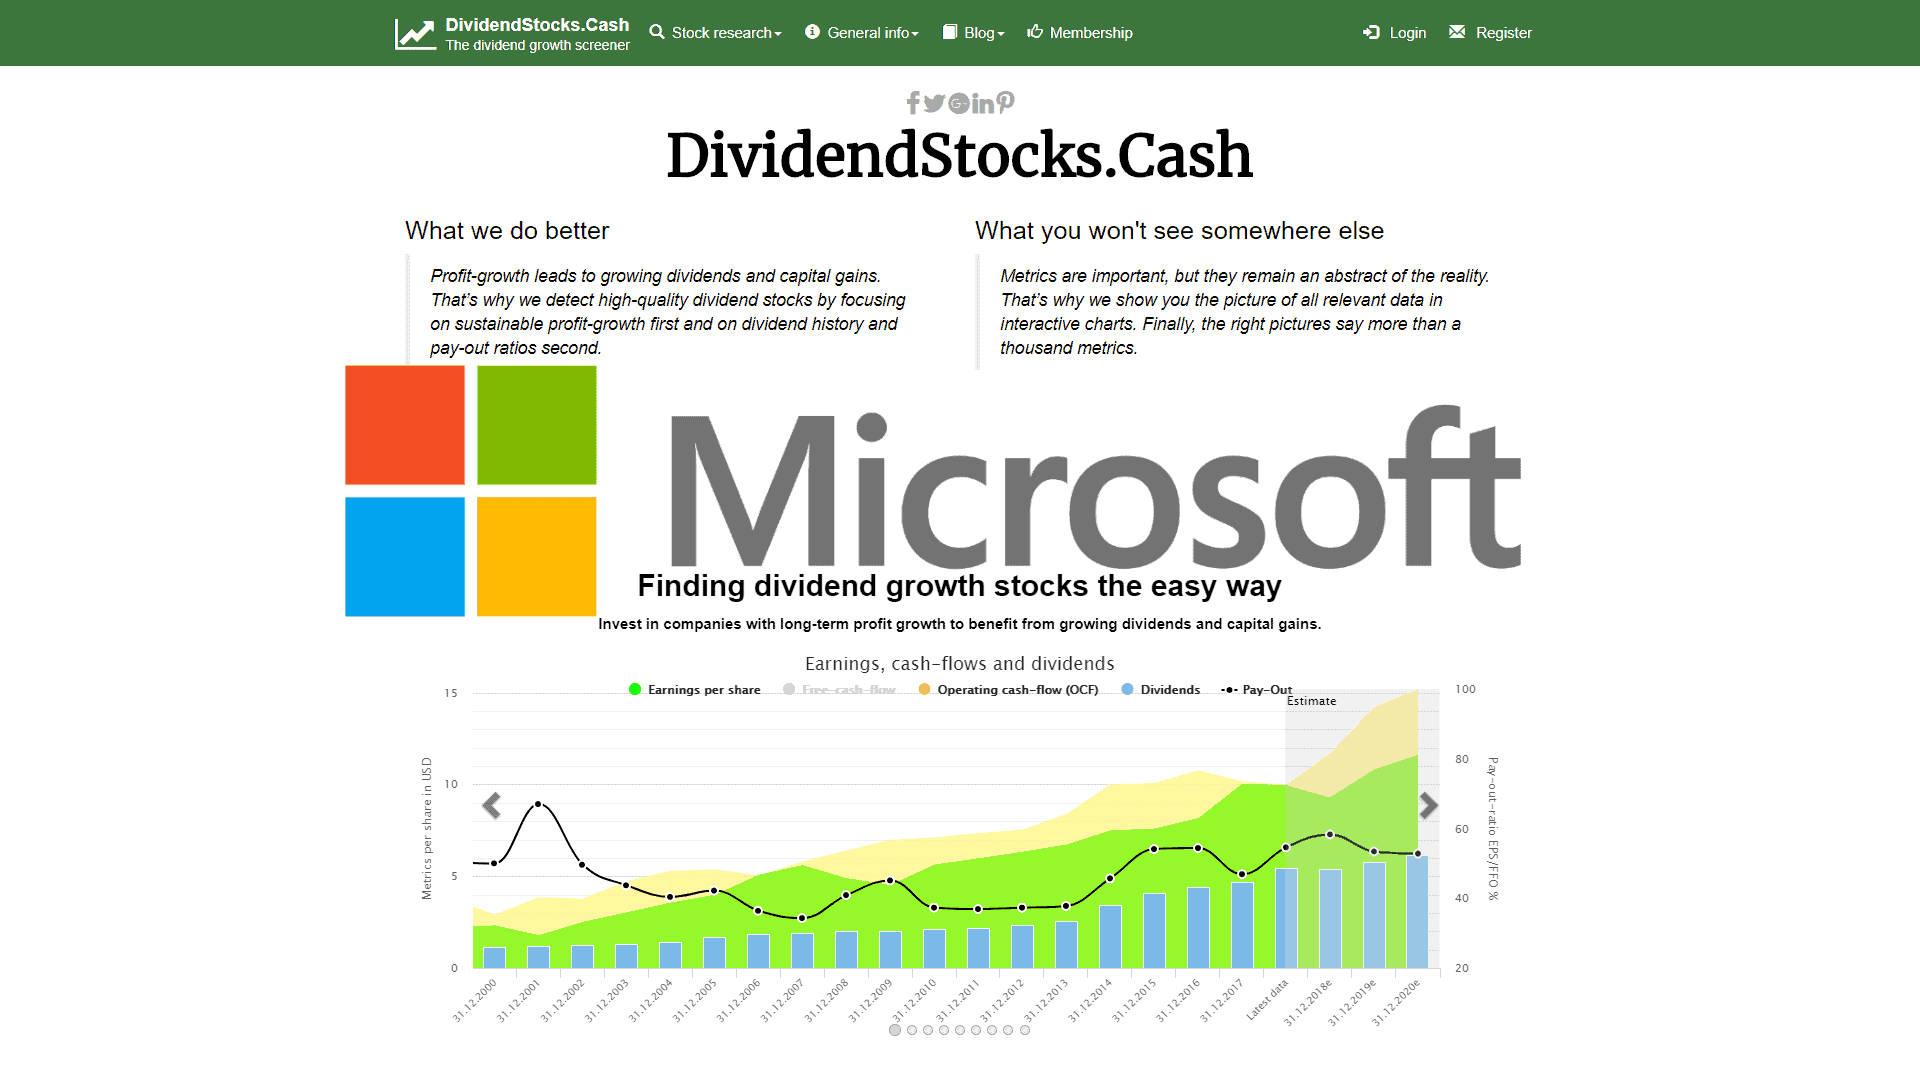 Microsoft stock - over-valued or still a buy?